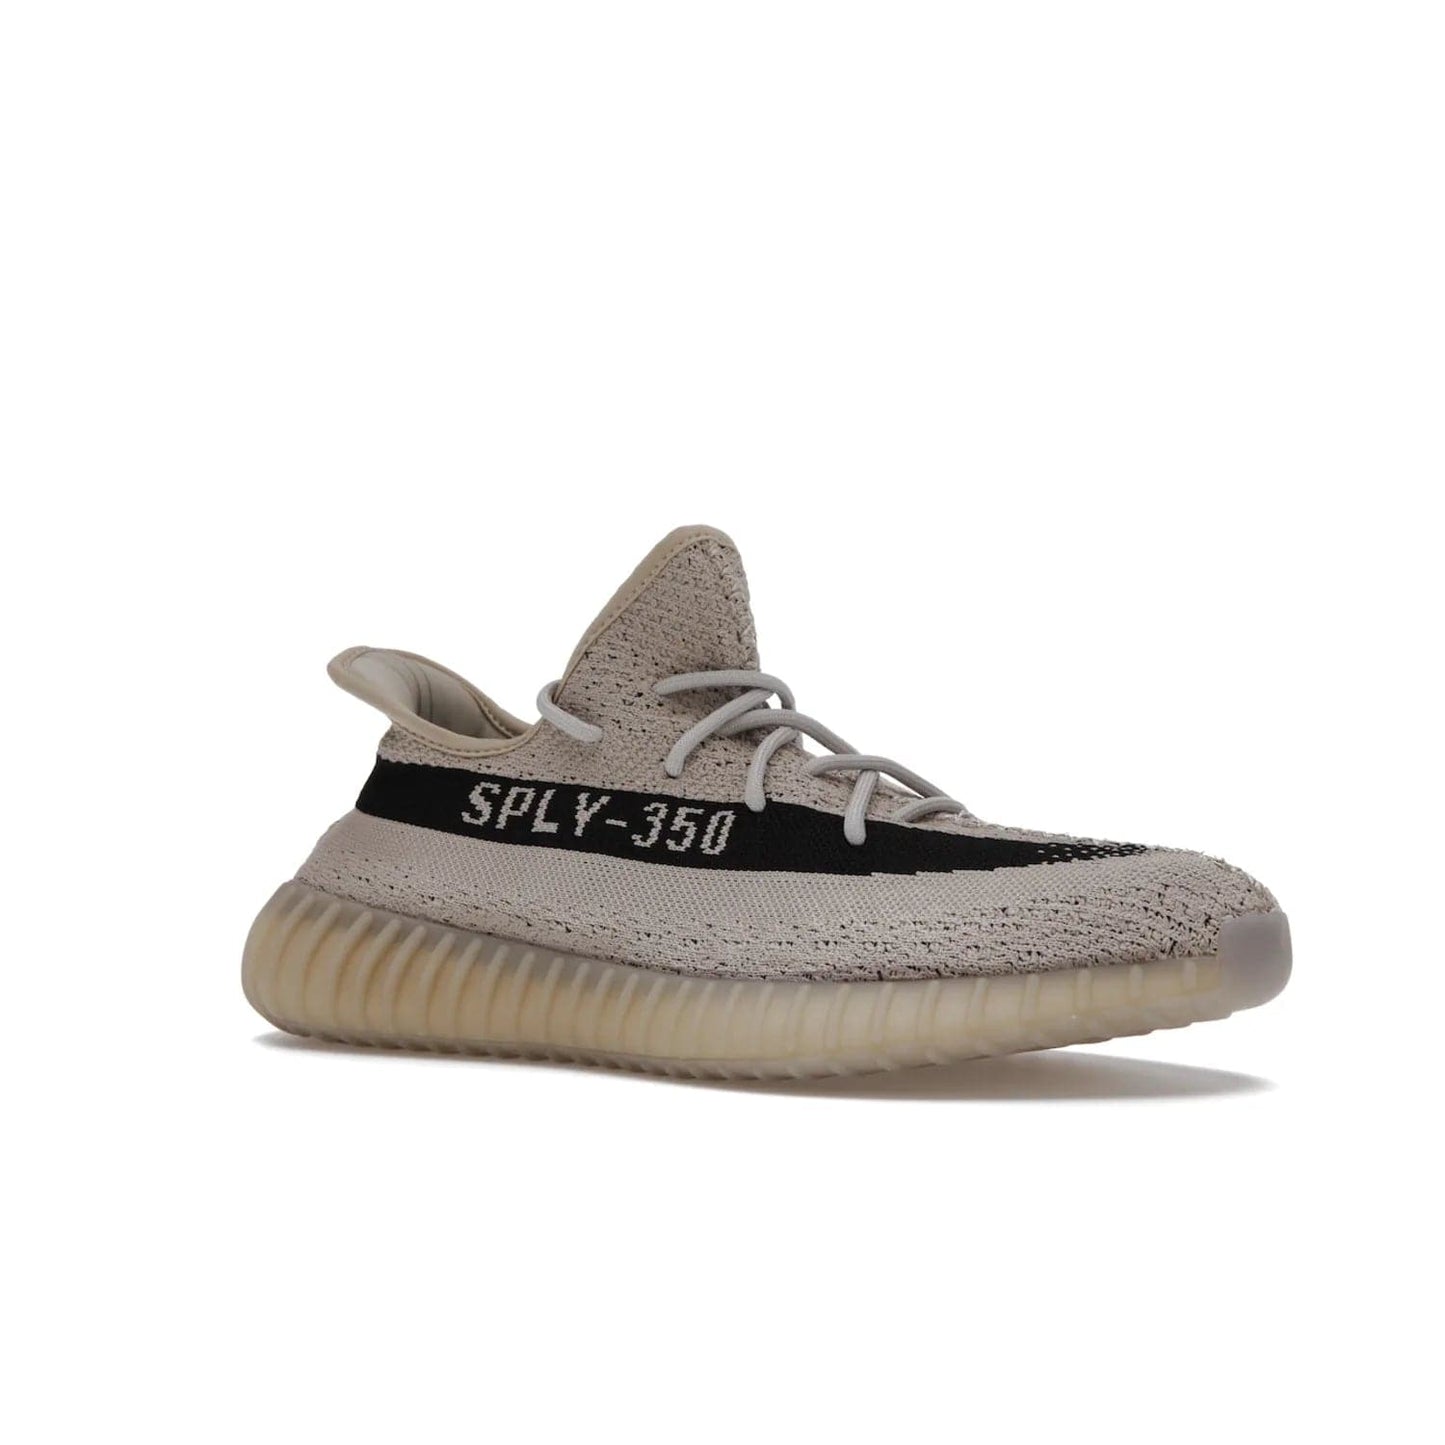 adidas Yeezy Boost 350 V2 Slate - Image 4 - Only at www.BallersClubKickz.com - Adidas Yeezy Boost 350 V2 Slate Core Black Slate featuring Primeknit upper, Boost midsole and semi-translucent TPU cage. Launched on 3/9/2022, retailed at $230.